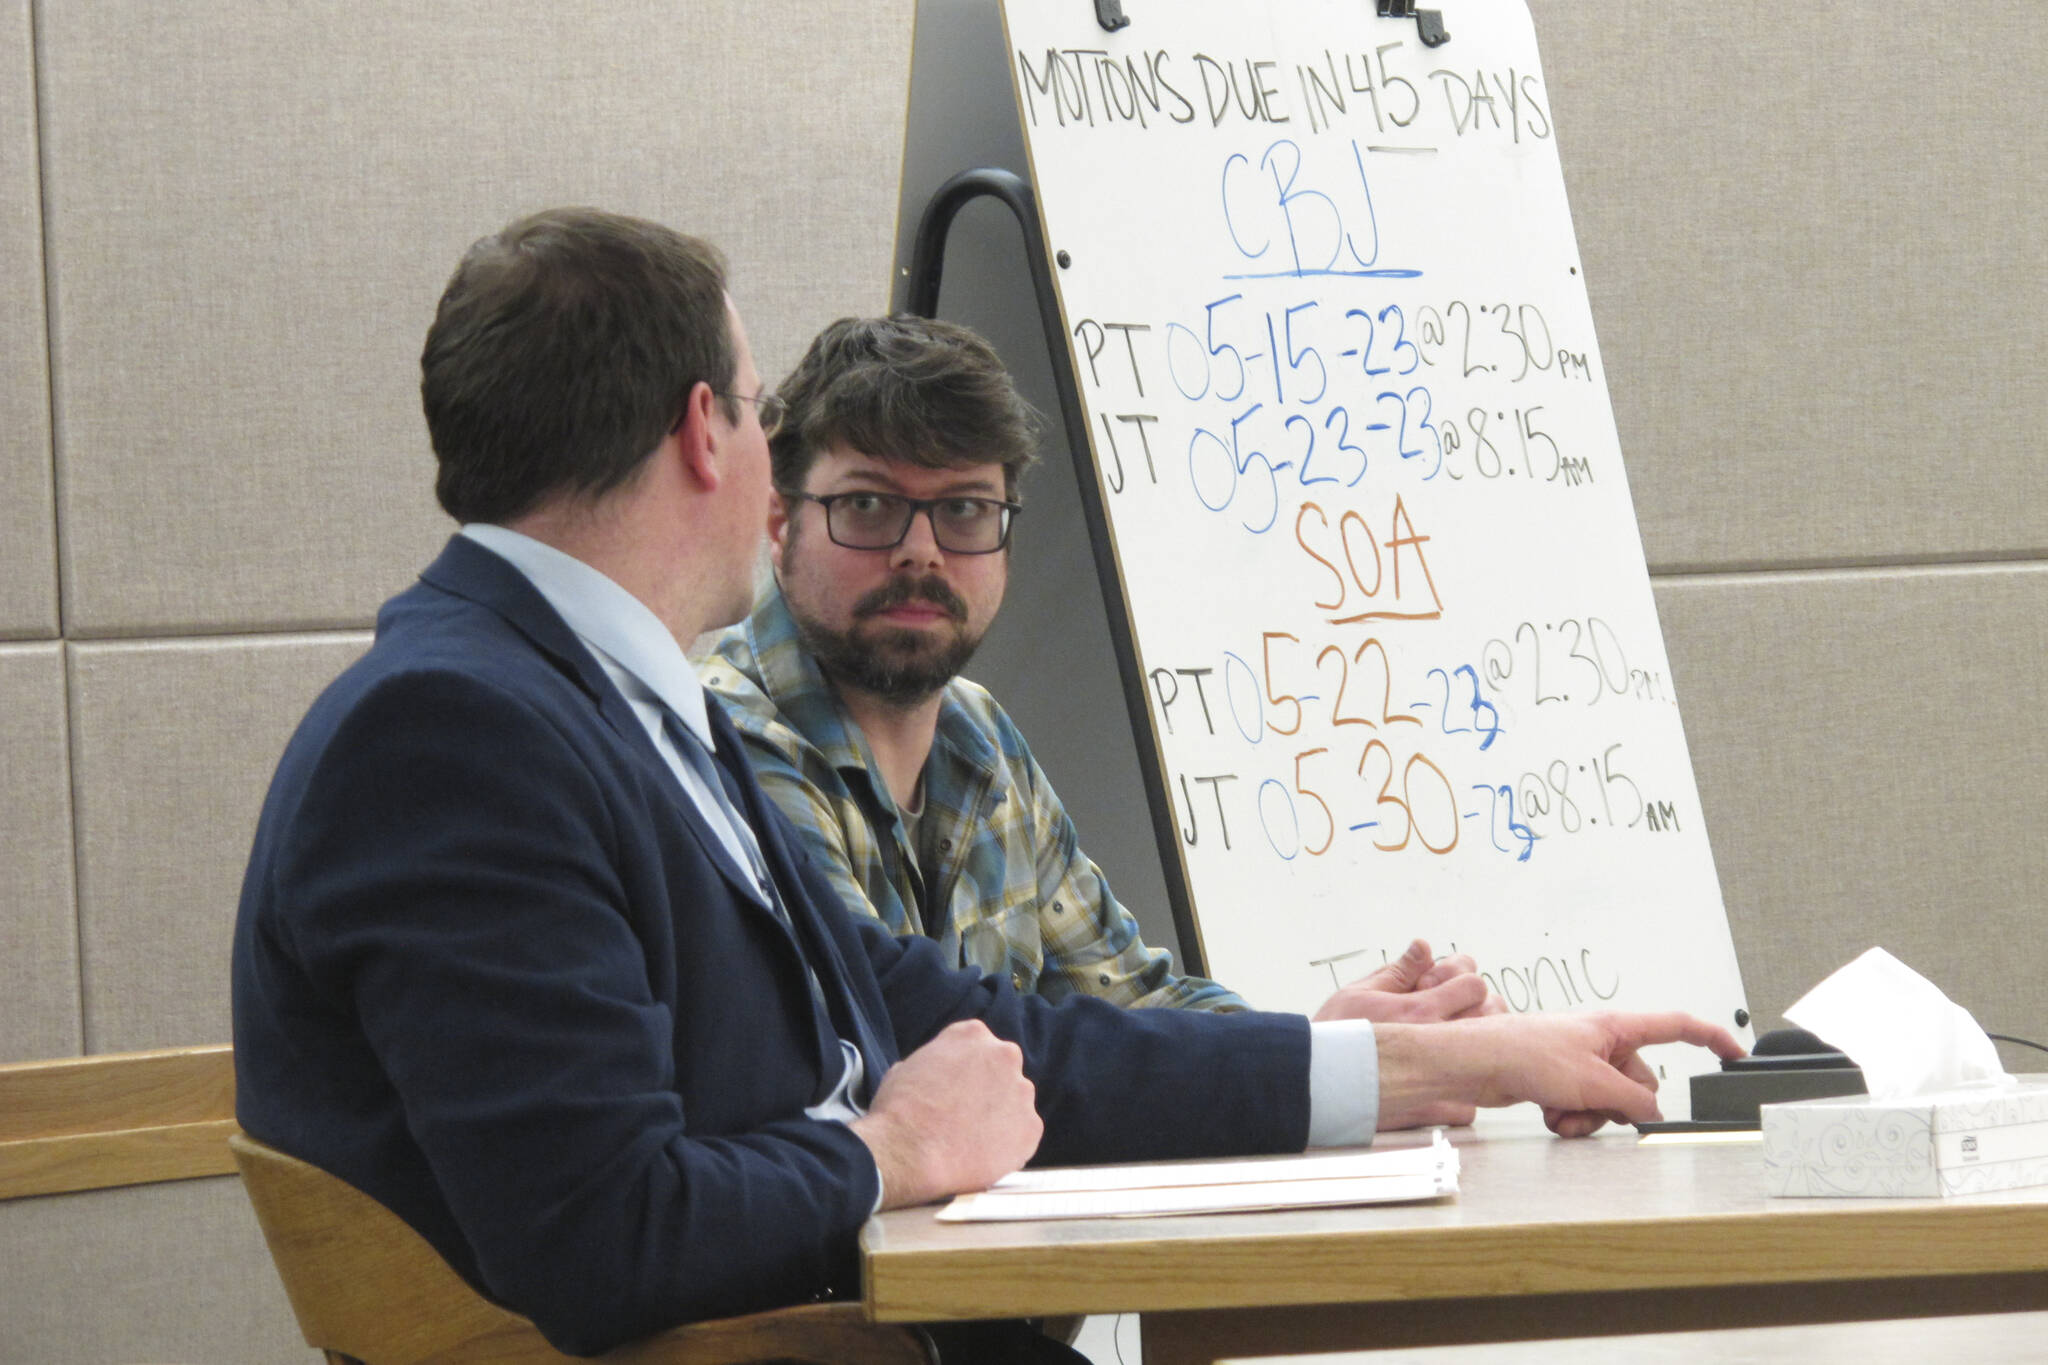 AP Photo / Becky Bohrer
Mitchell Thomas Watley, right, listens to his attorney Nick Polasky before a scheduled court hearing on Tuesday, April 11, 2023, in Juneau, Alaska. A preliminary hearing that was scheduled for Tuesday for Watley, a children’s book illustrator, was pushed to April 21. Watley has been accused of terroristic threatening after authorities said he posted in locations in Juneau transphobic notes that referenced shooting children.